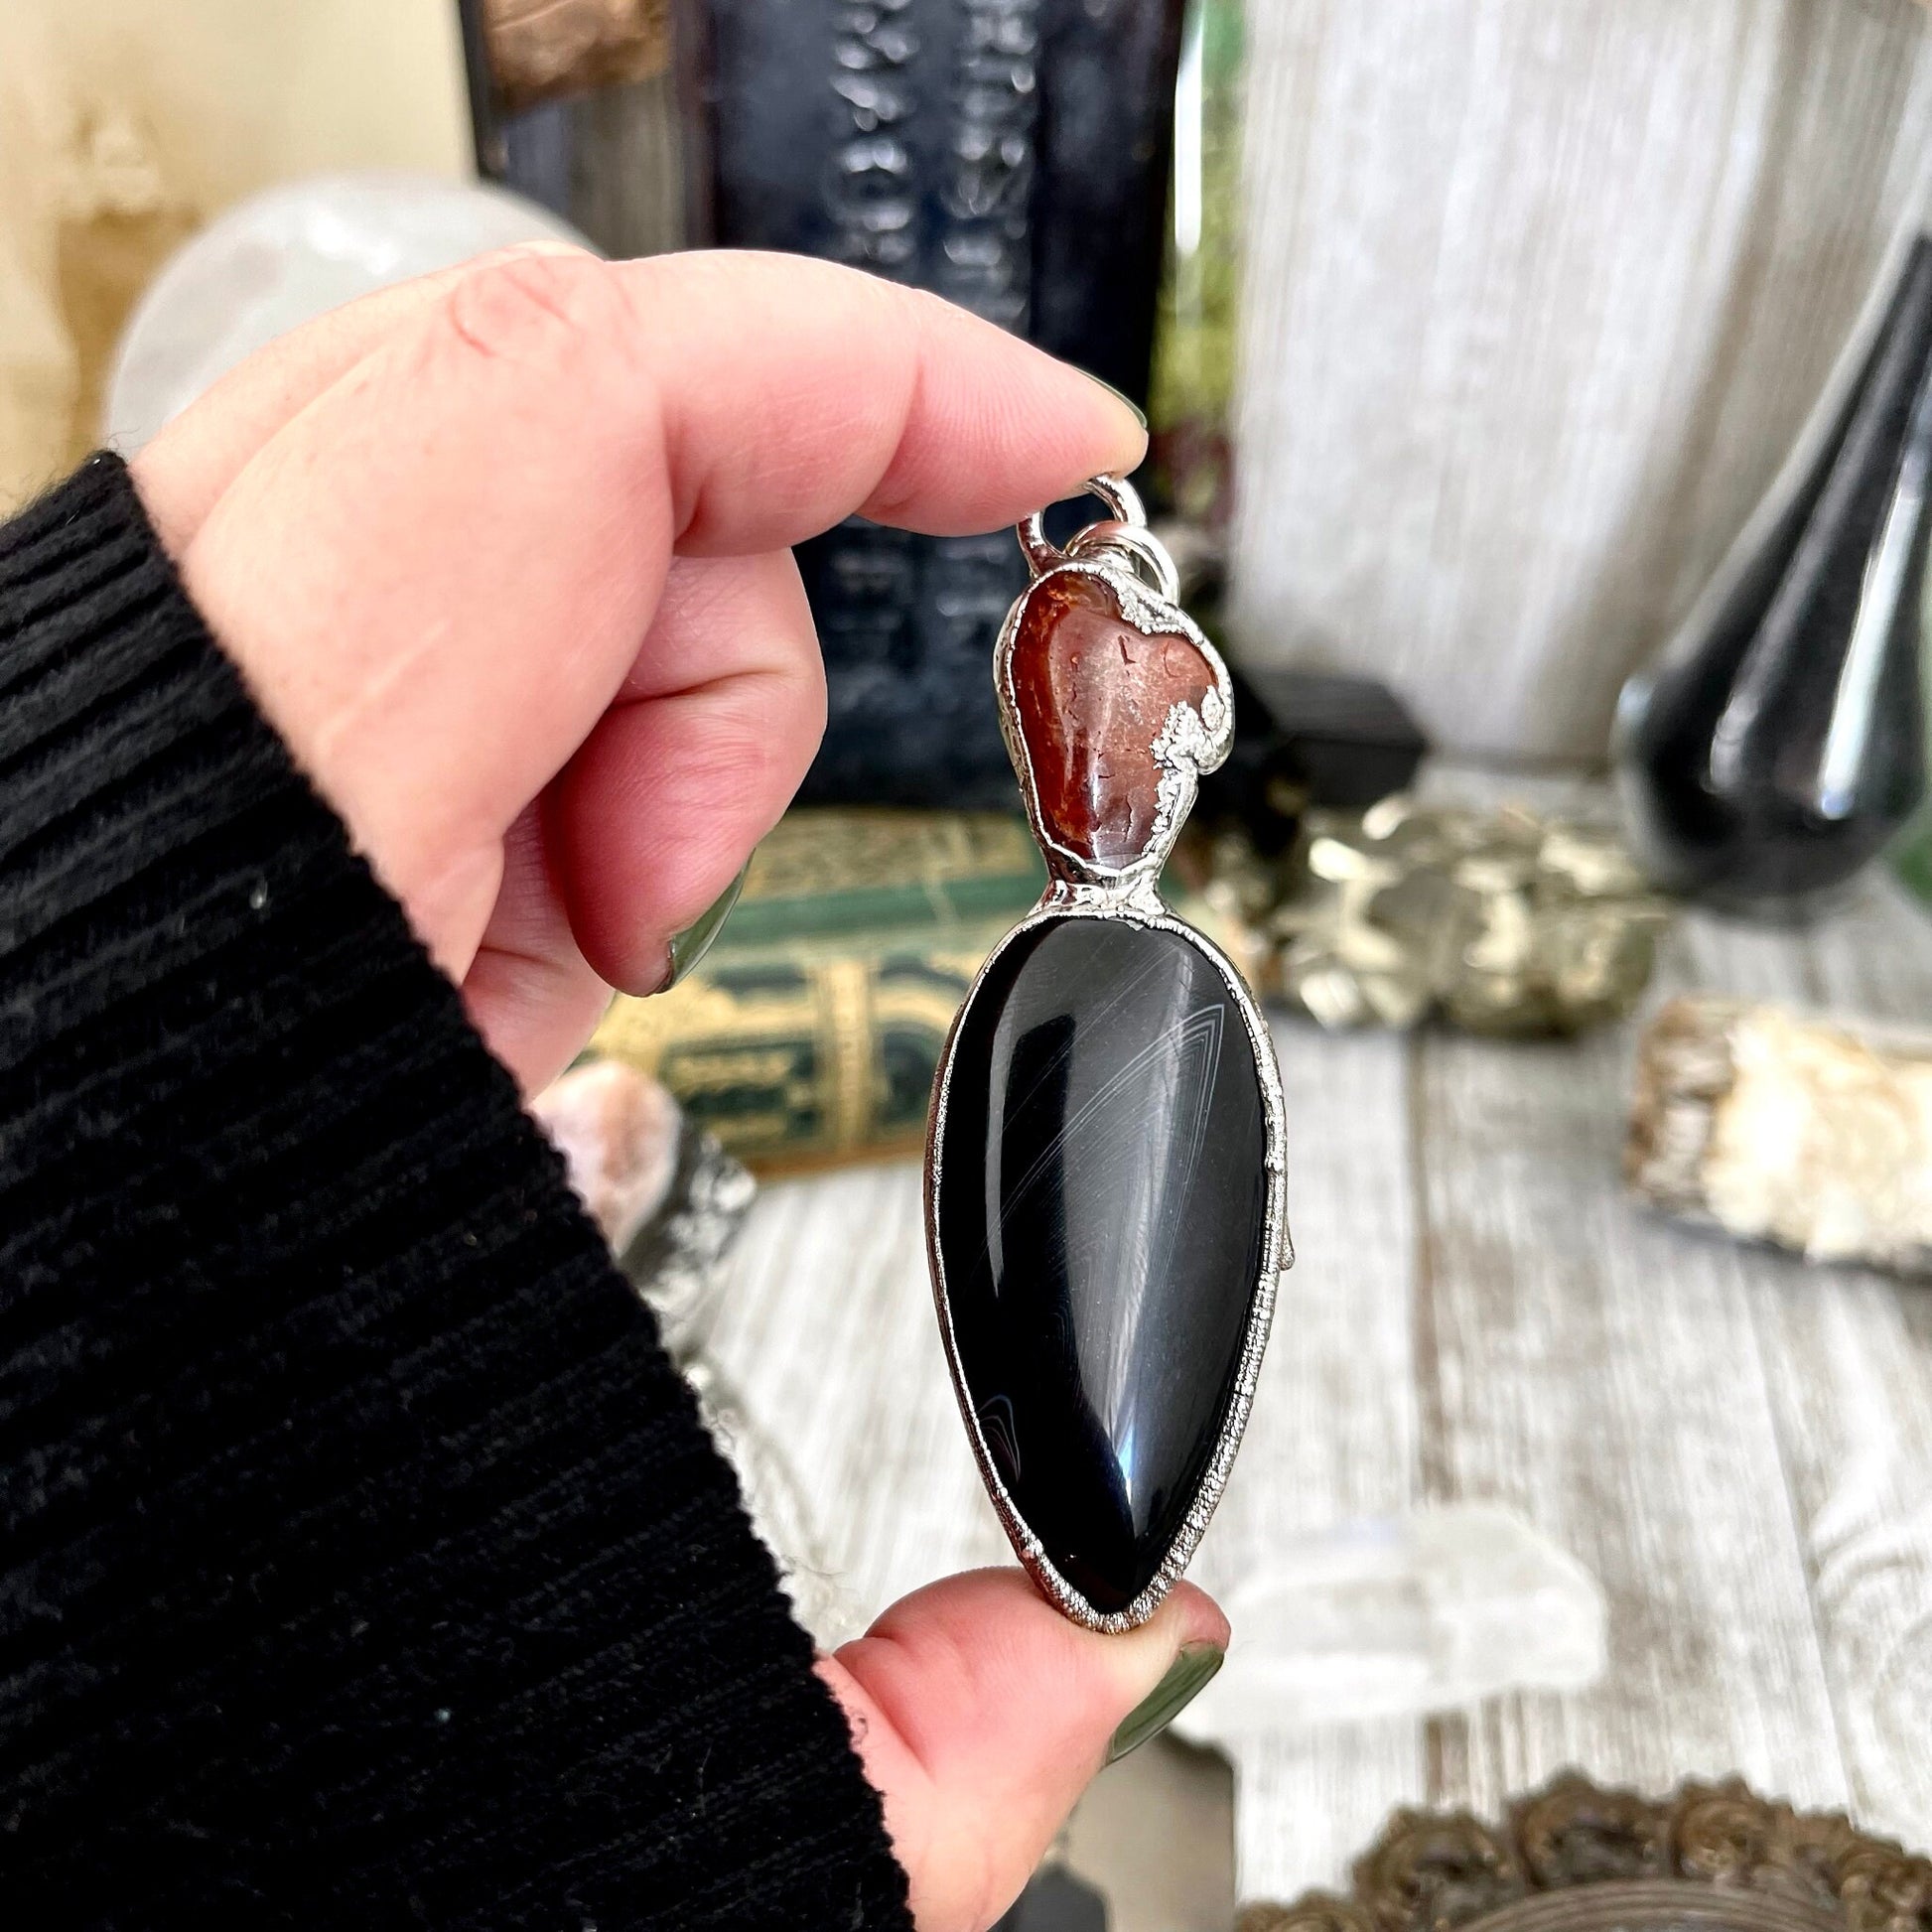 Two Stone Red Carnelian Black Banded Agate Necklace in Fine Silver / Foxlark Collection - One of a Kind Jewelry // Boho Alternative Pendent